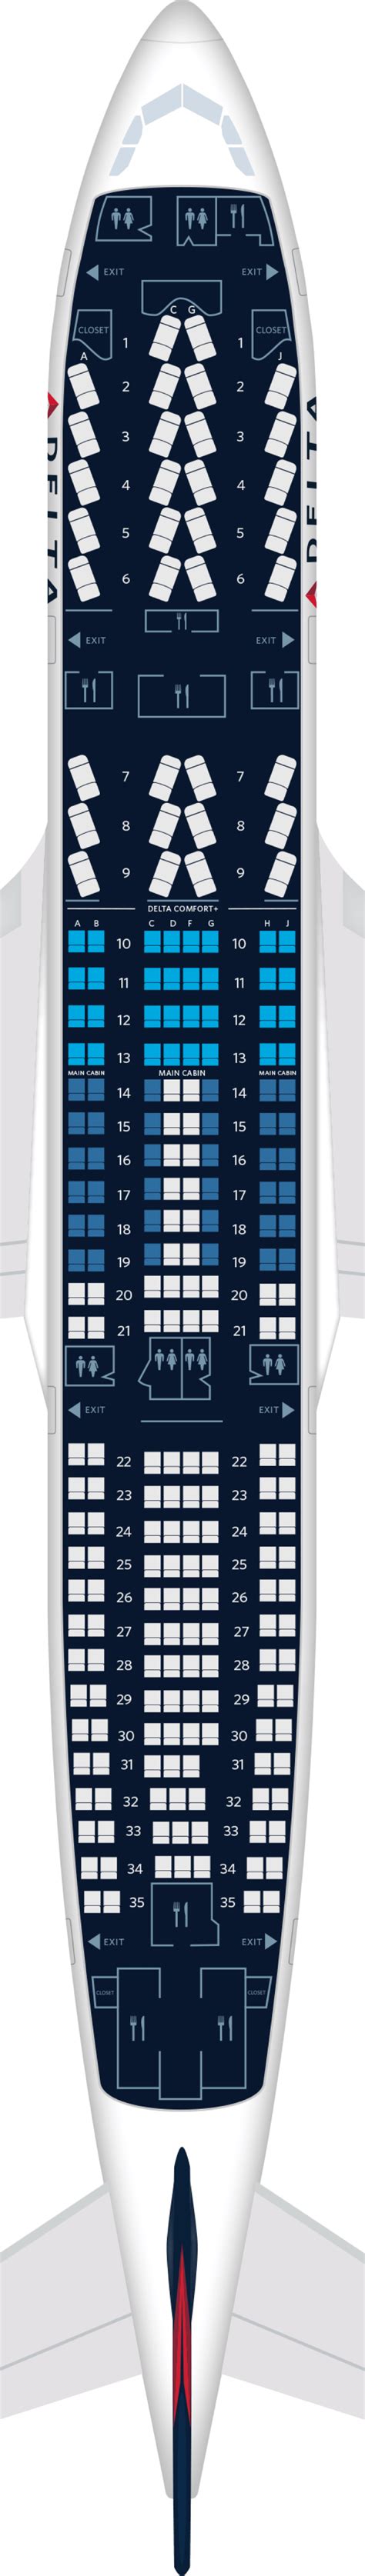 Airbus A330 200 Seat Maps Specs And Amenities Delta Air Lines